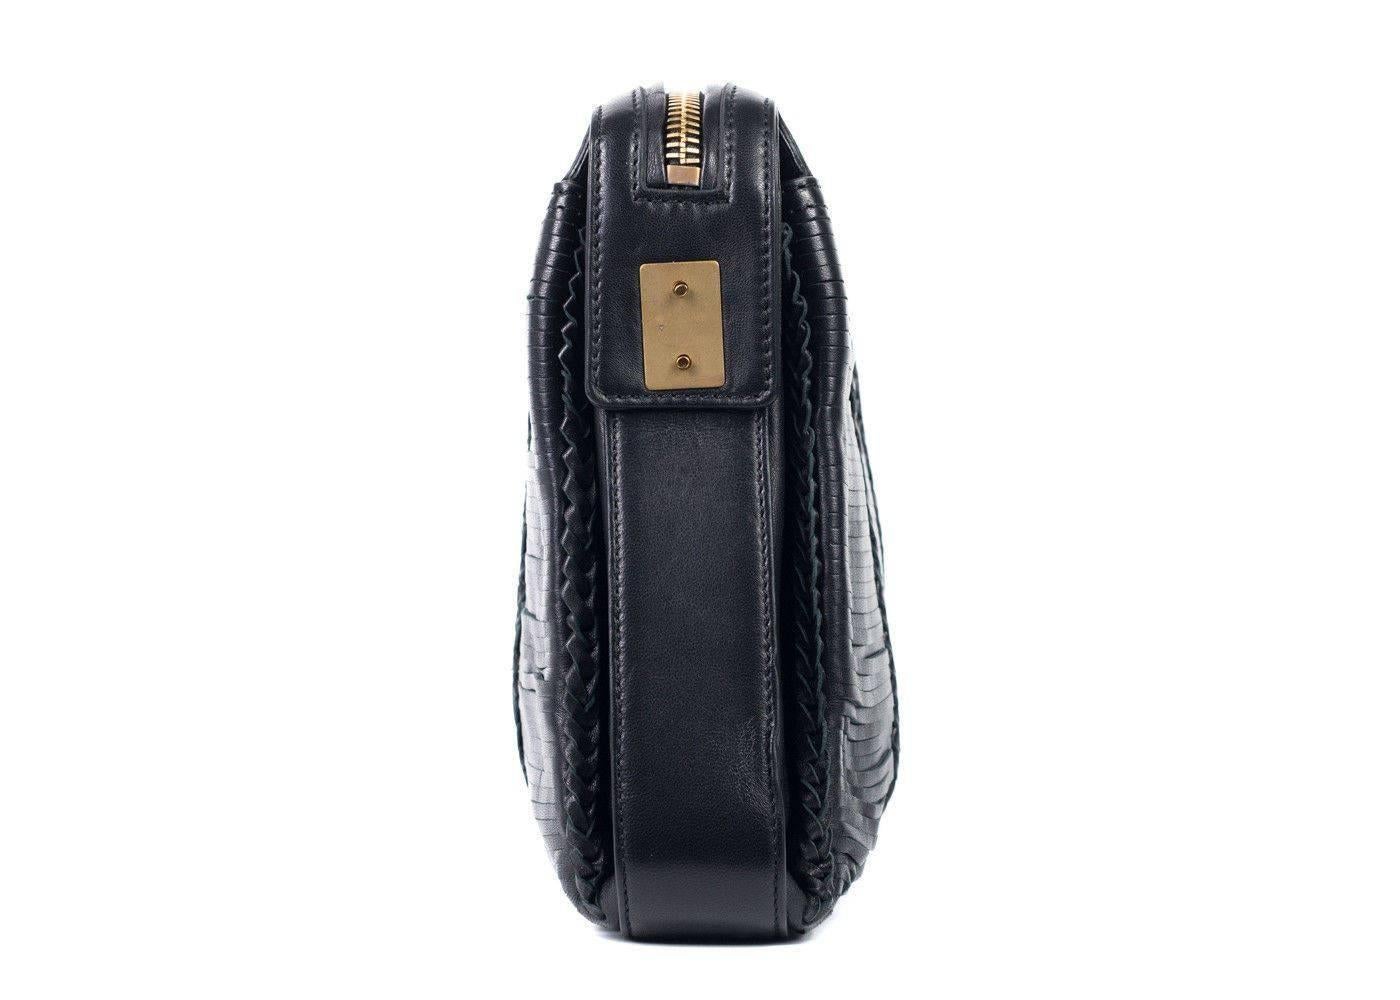 Roberto Cavalli Women's Black Leather Woven Shoulder Bag In New Condition For Sale In Brooklyn, NY